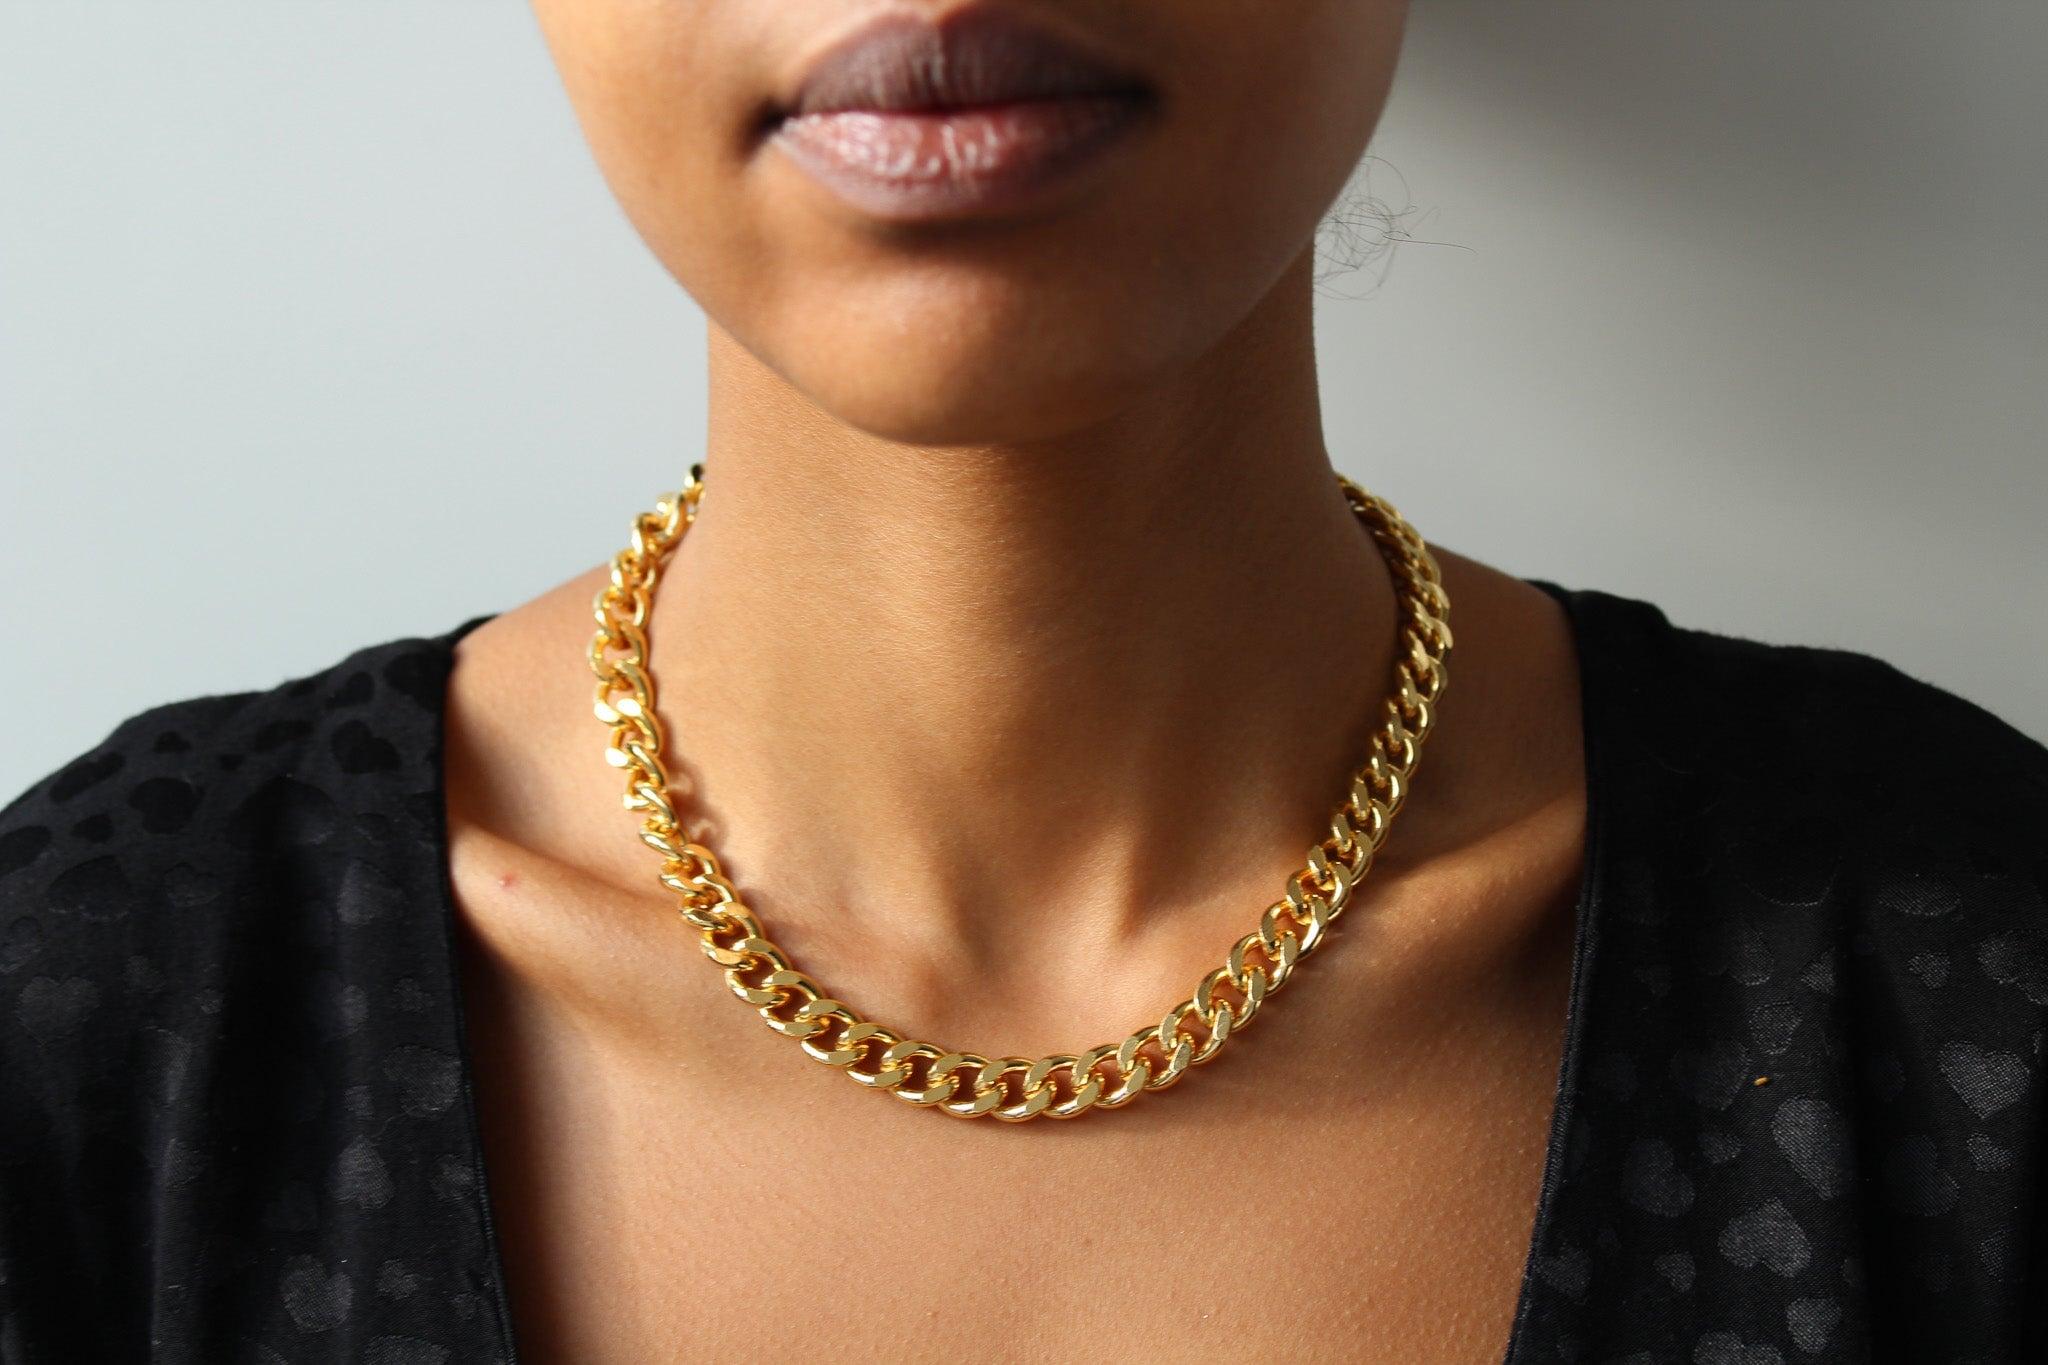 Women's Vintage 1980s Chain Necklace - 18 Carat Gold Plated Vintage Deadstock For Sale